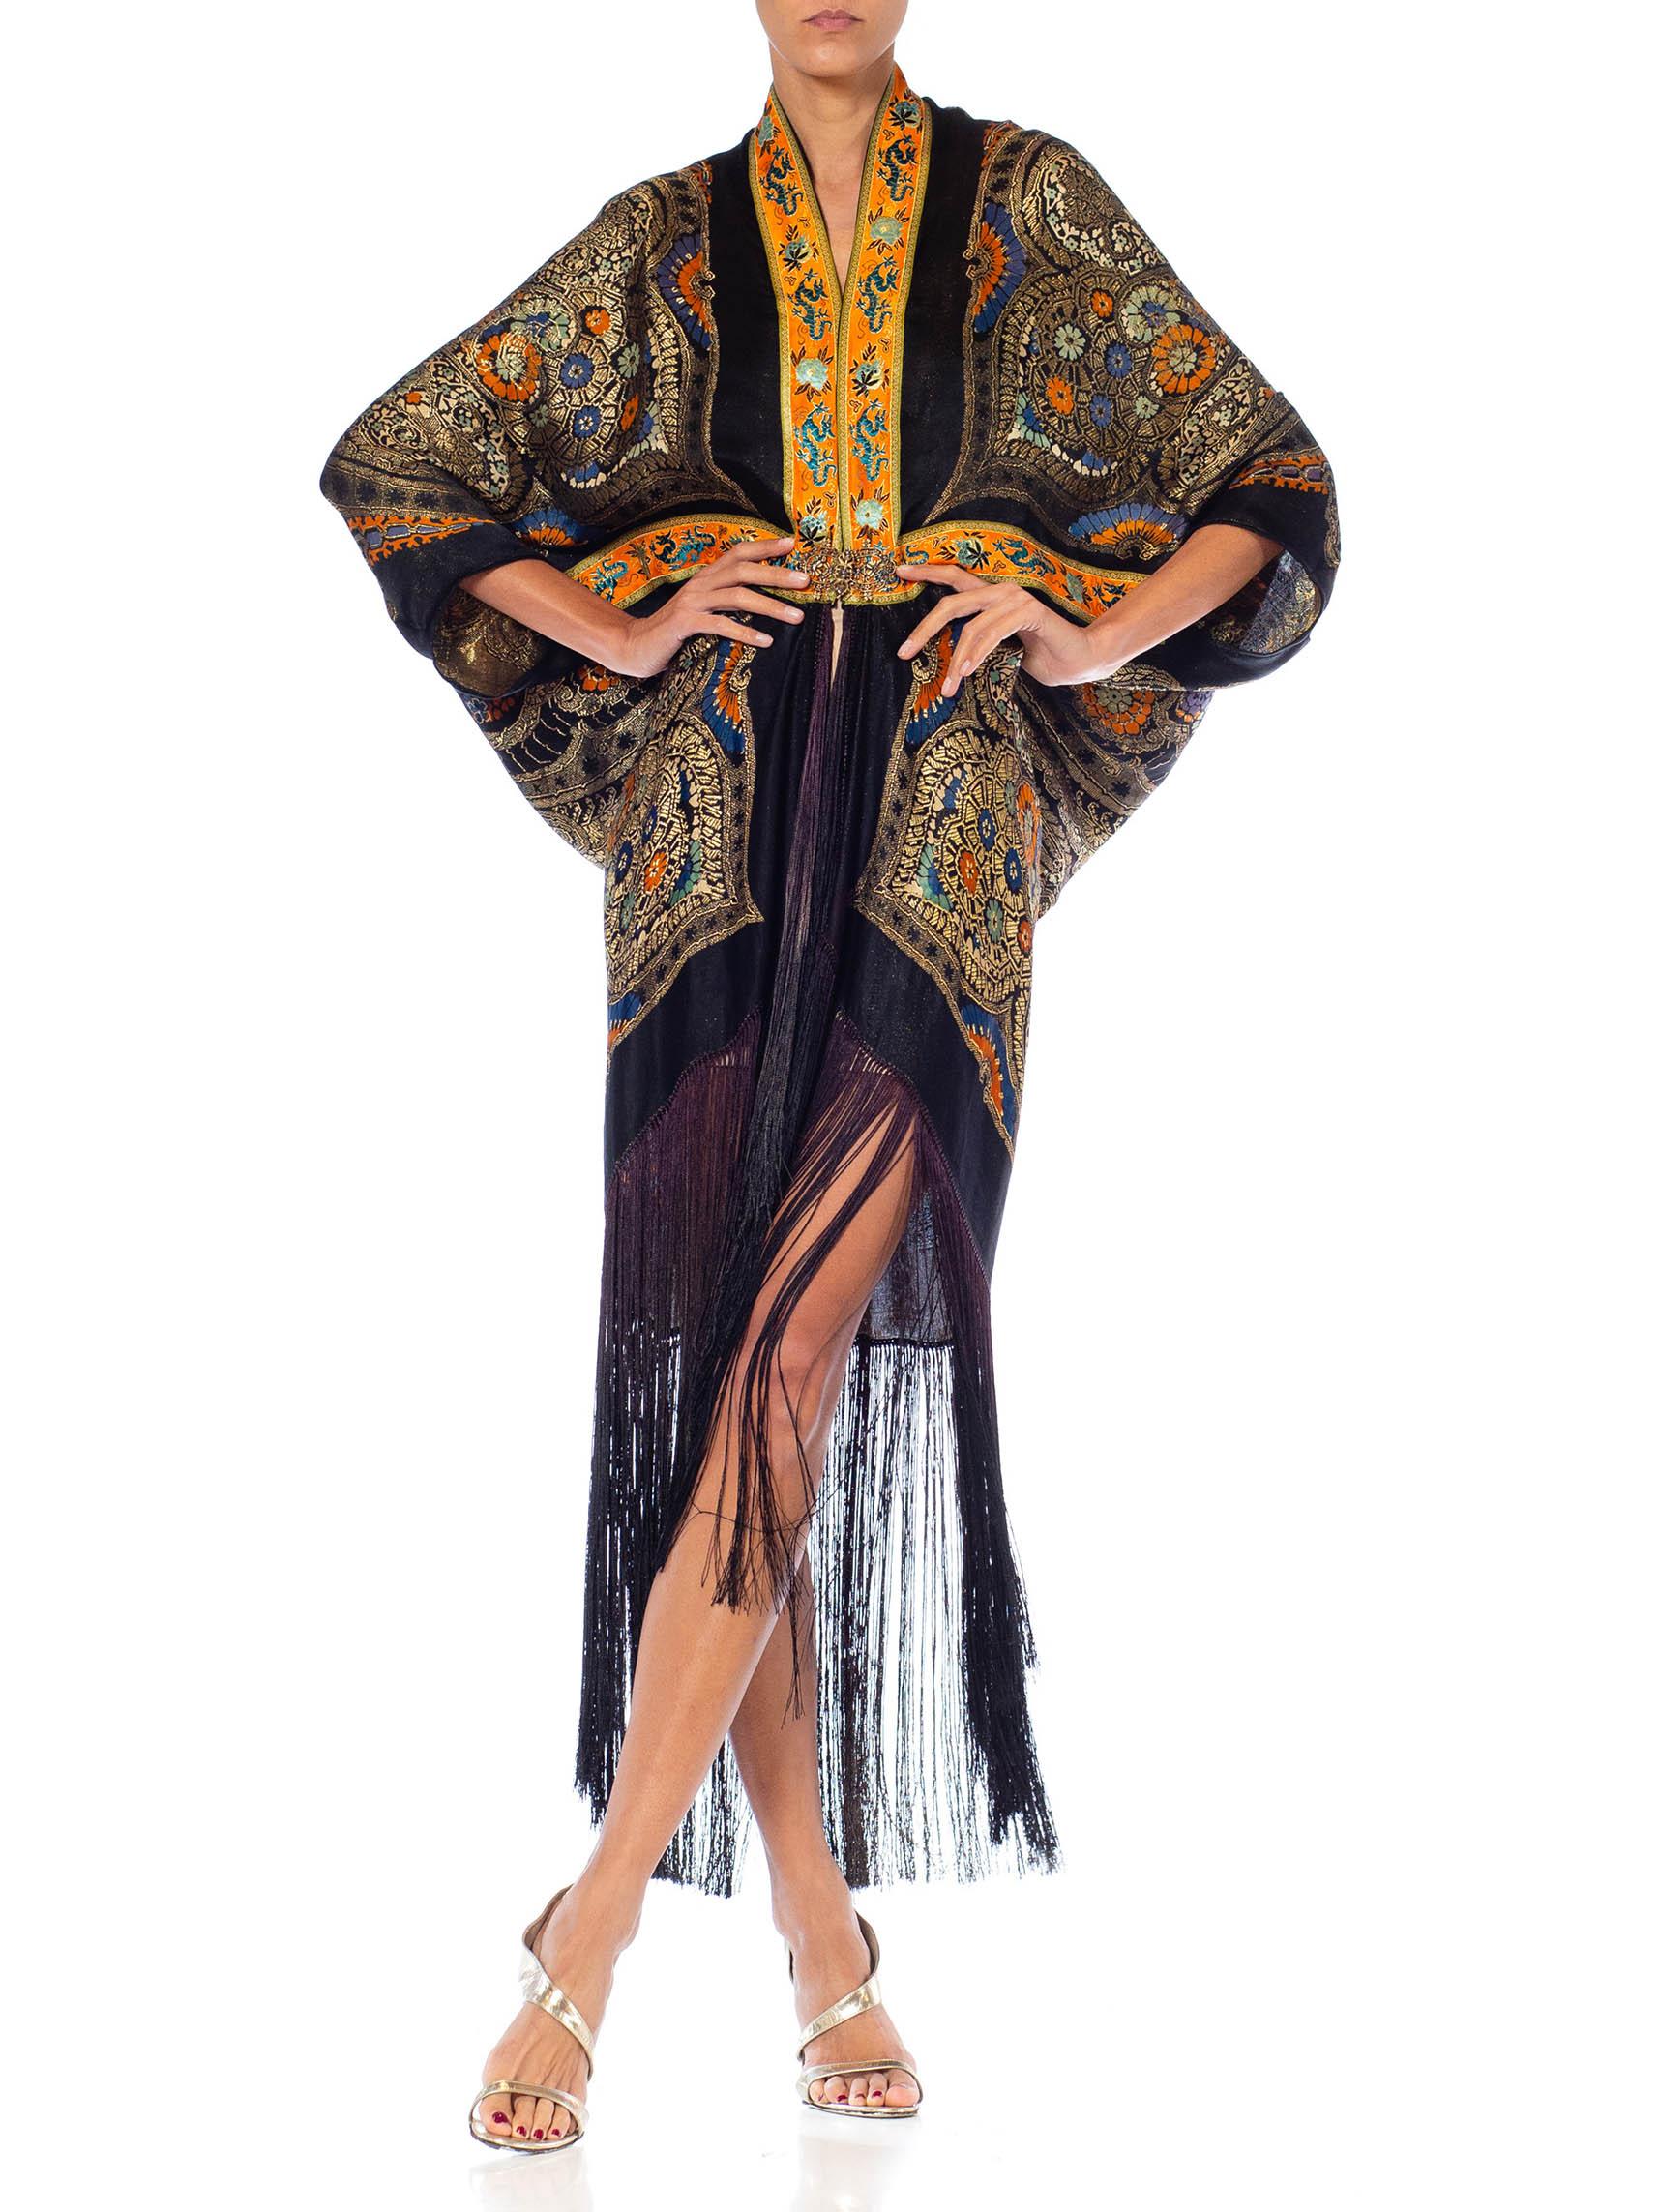 Morphew Collection Black, Orange & Gold Silk Lamé Floral Paisley Cocoon With Fr For Sale 3